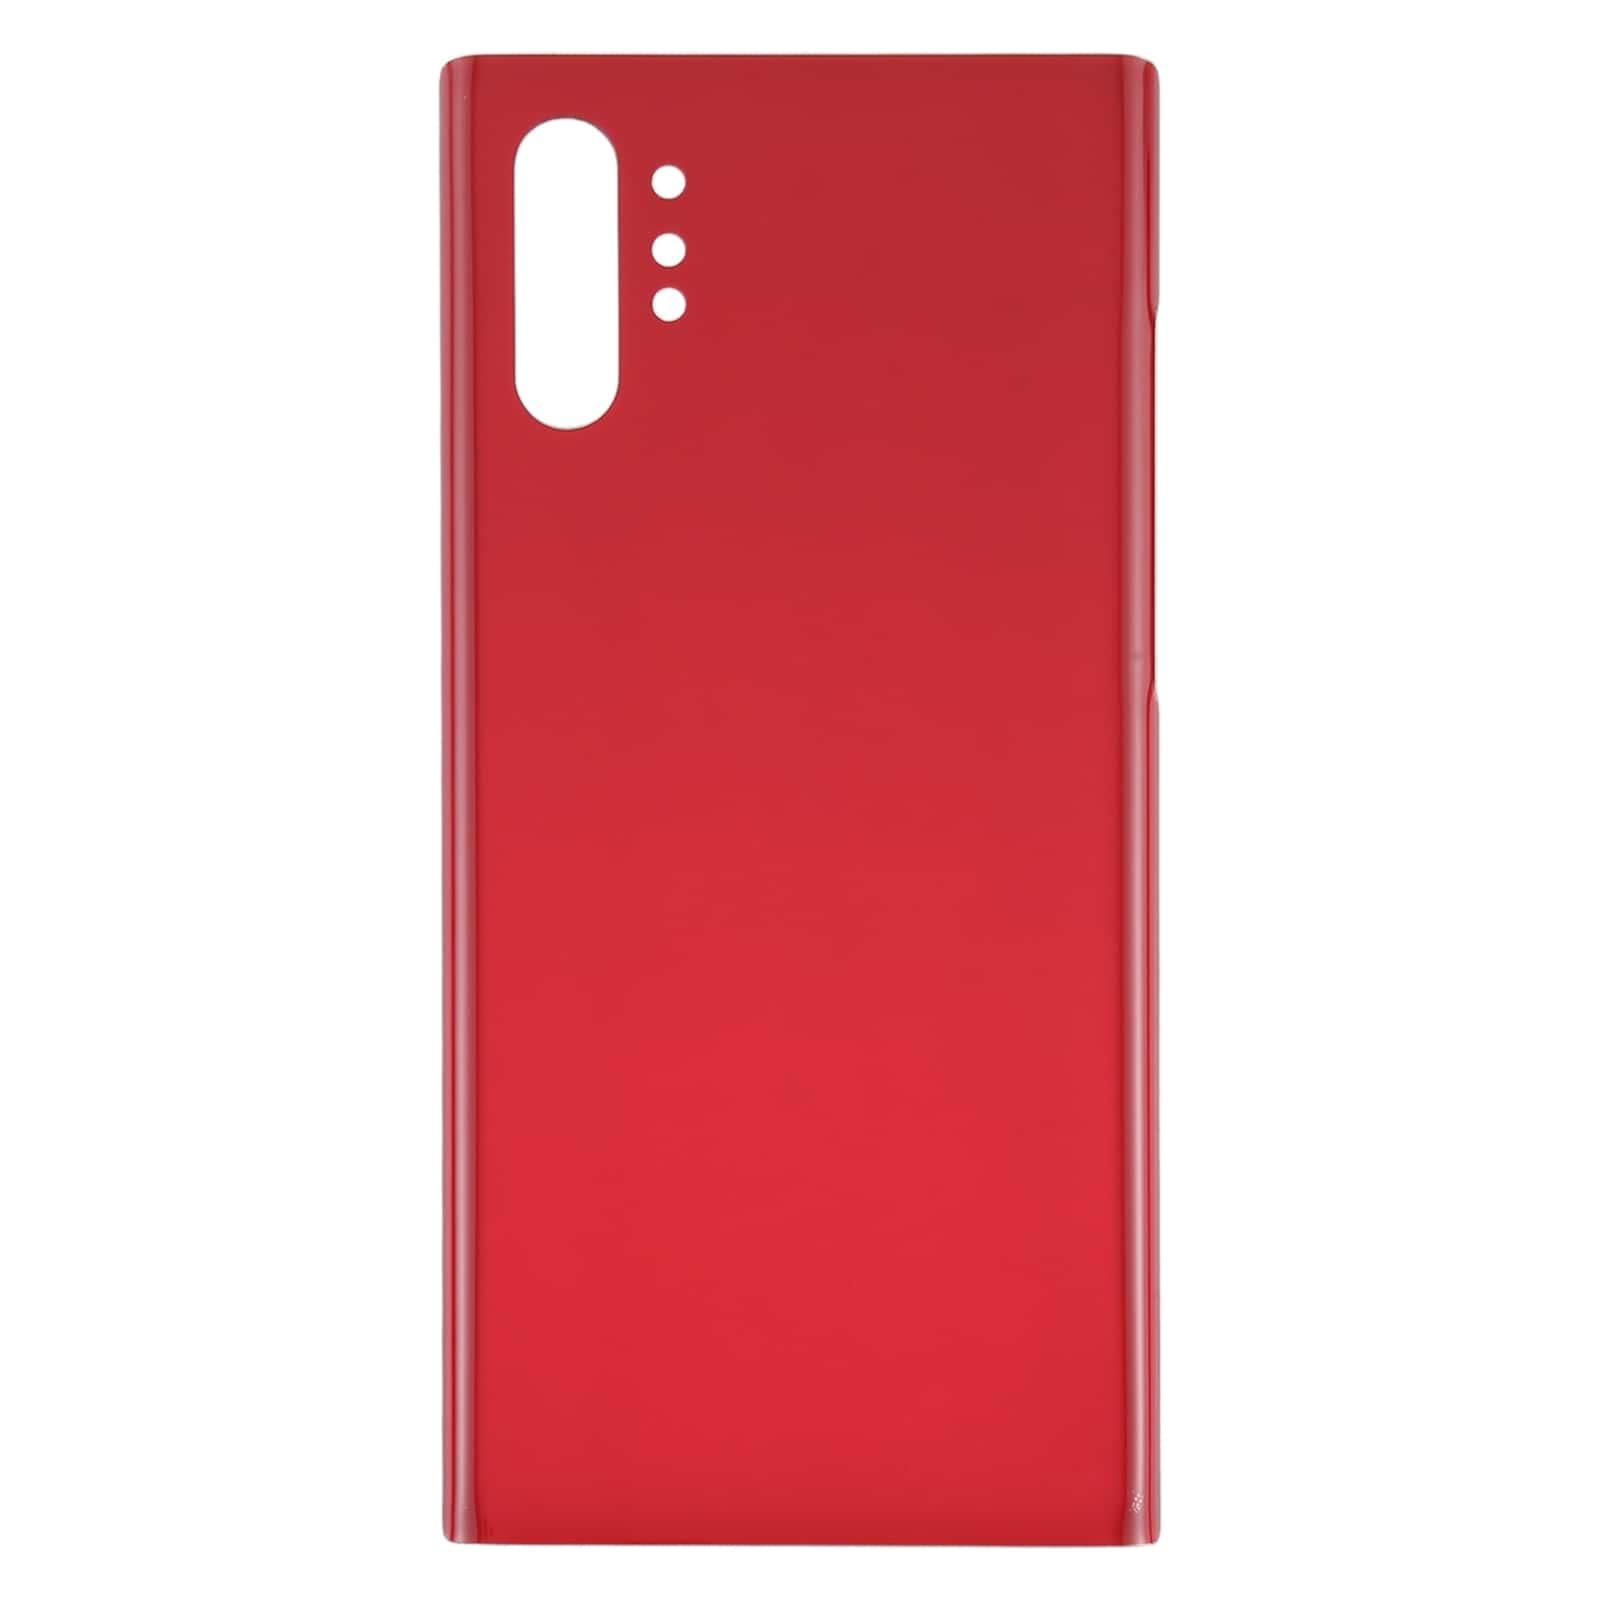 Back Glass Panel for  Samsung Galaxy Note10 Red